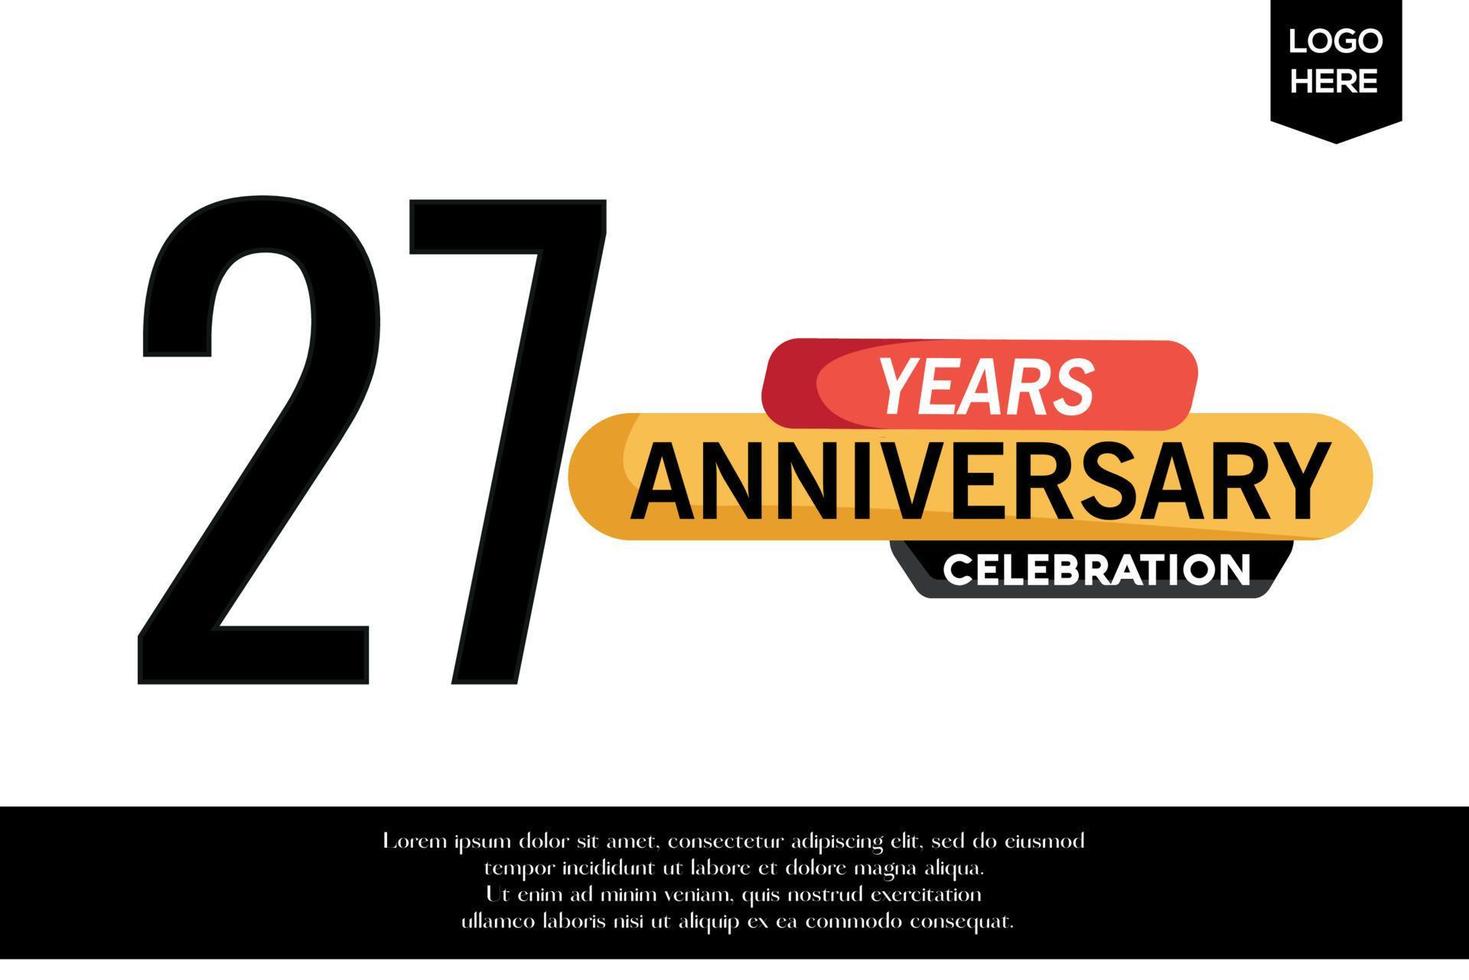 27th anniversary celebration logotype black yellow colored with text in gray color isolated on white background vector template design